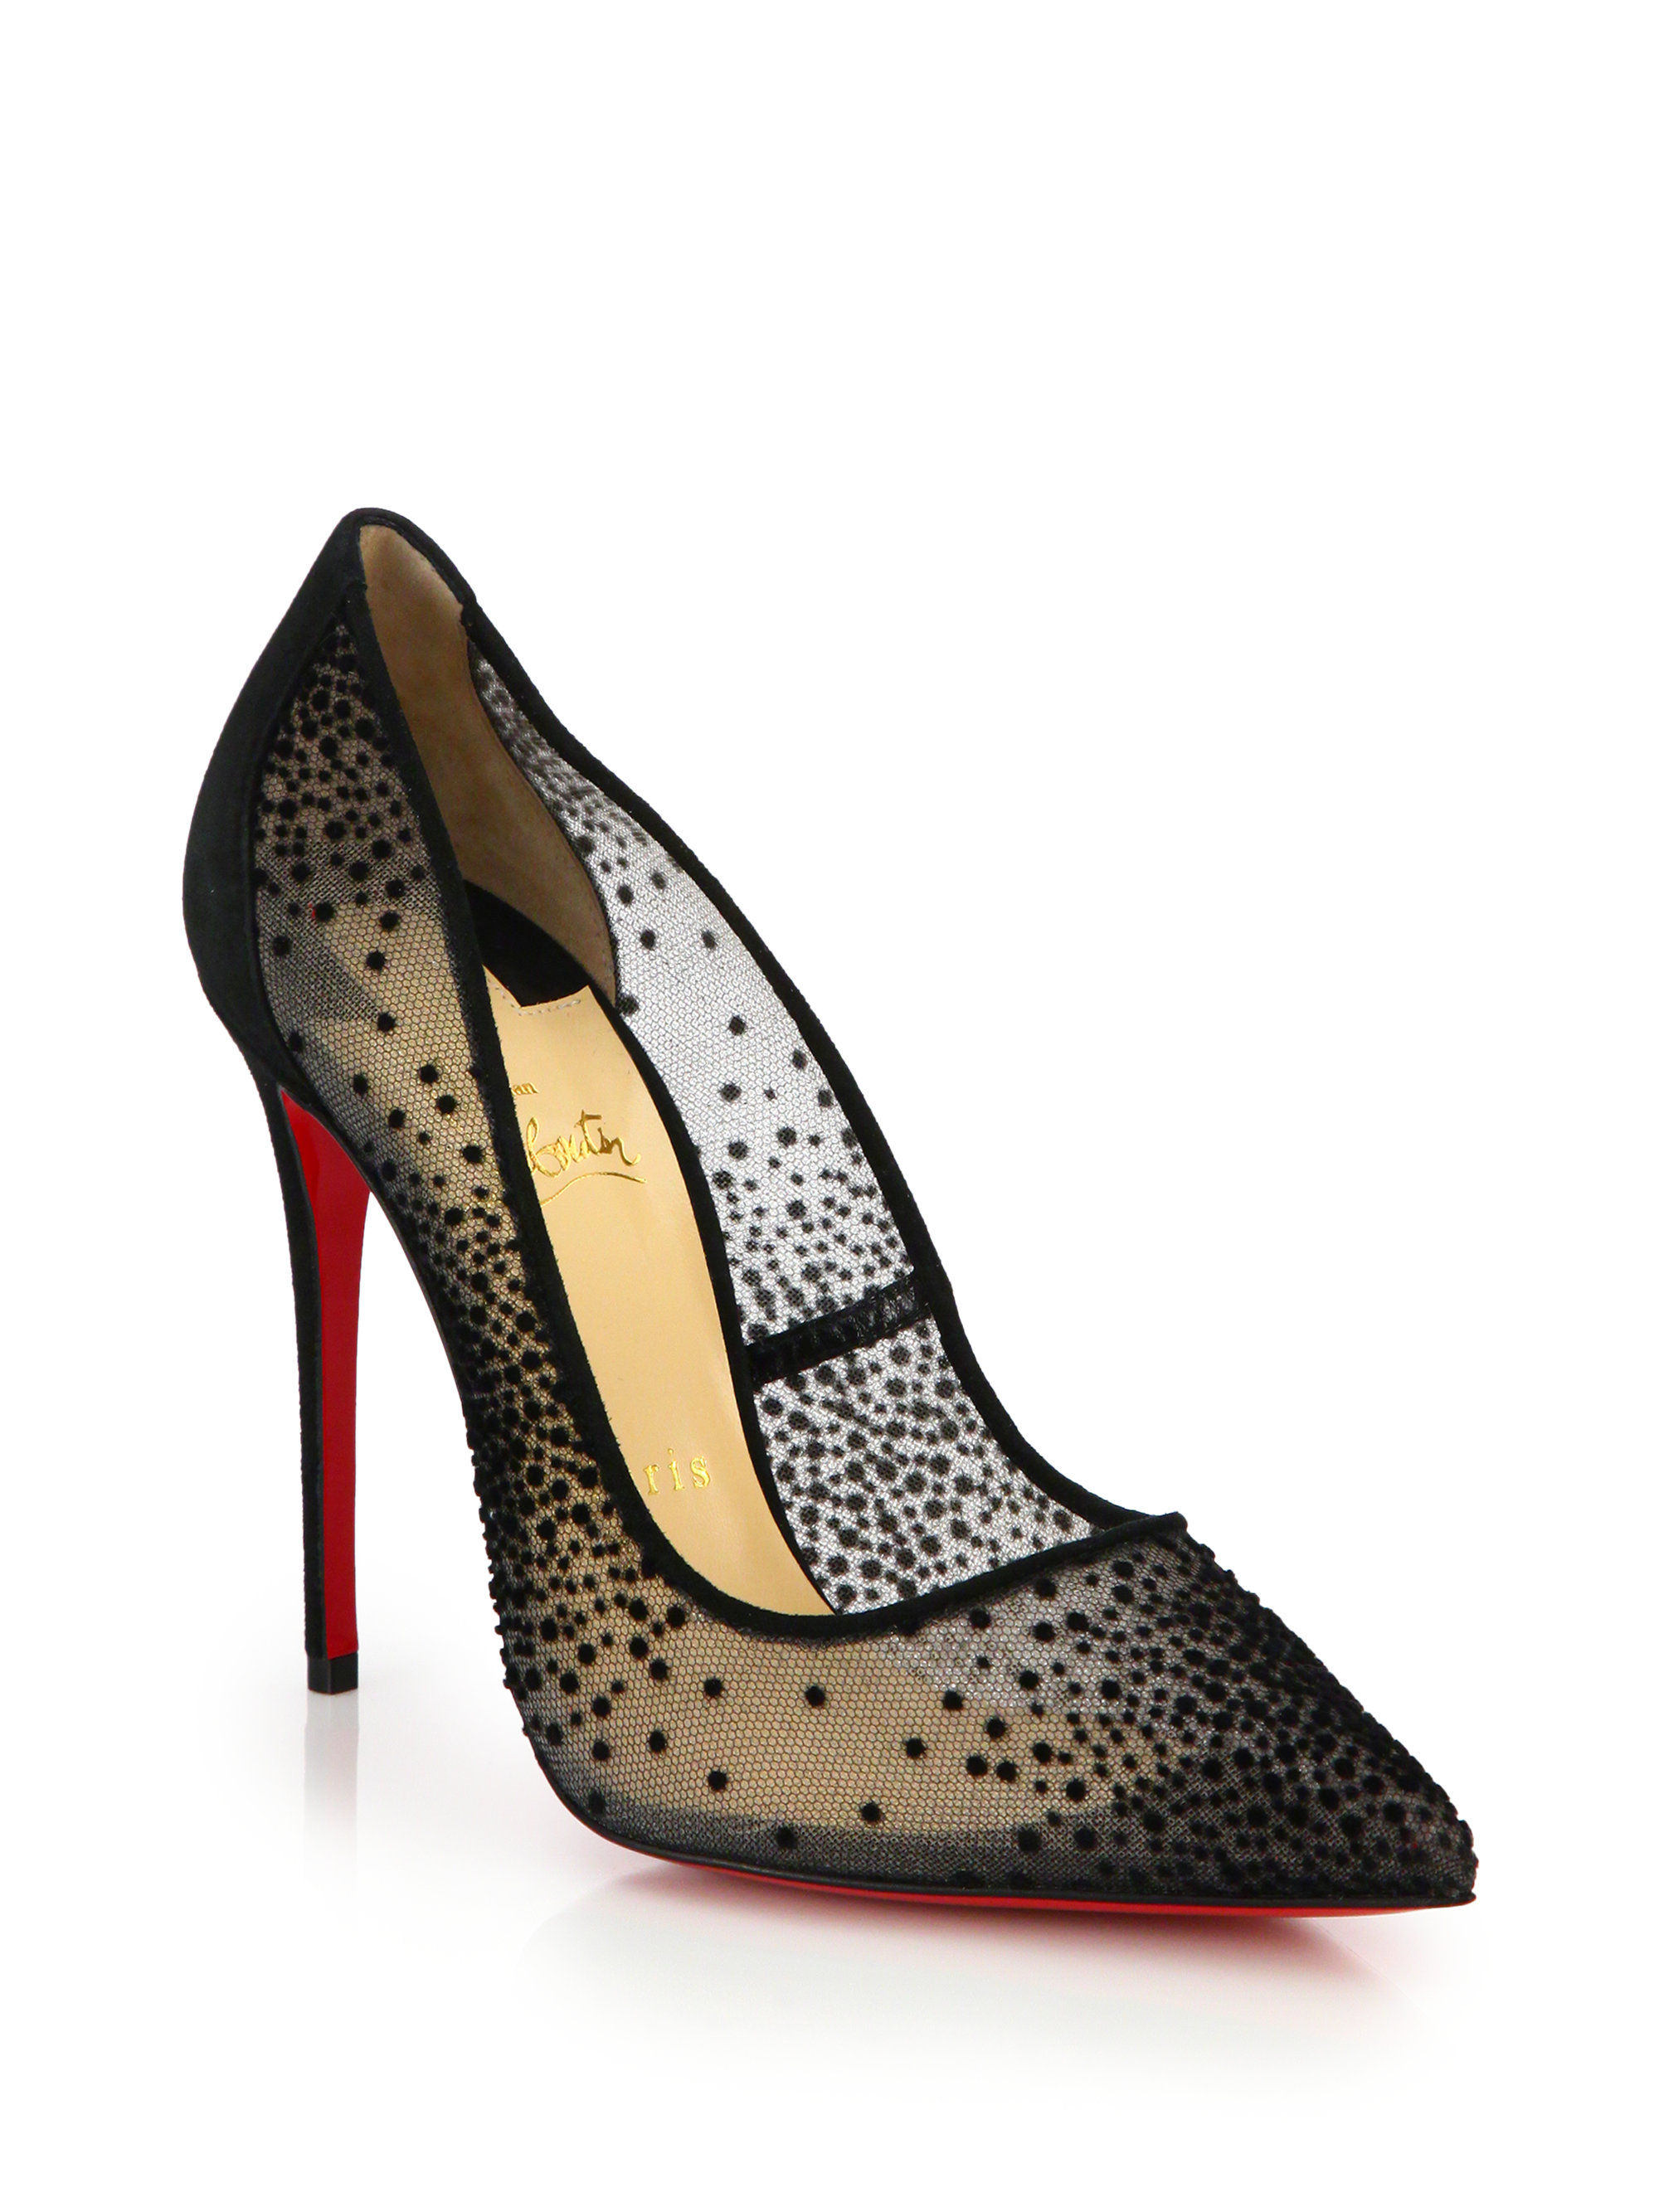 christian louboutin fake - Christian louboutin Pigalle Follies Ombr Pumps in Black (BLACK ...